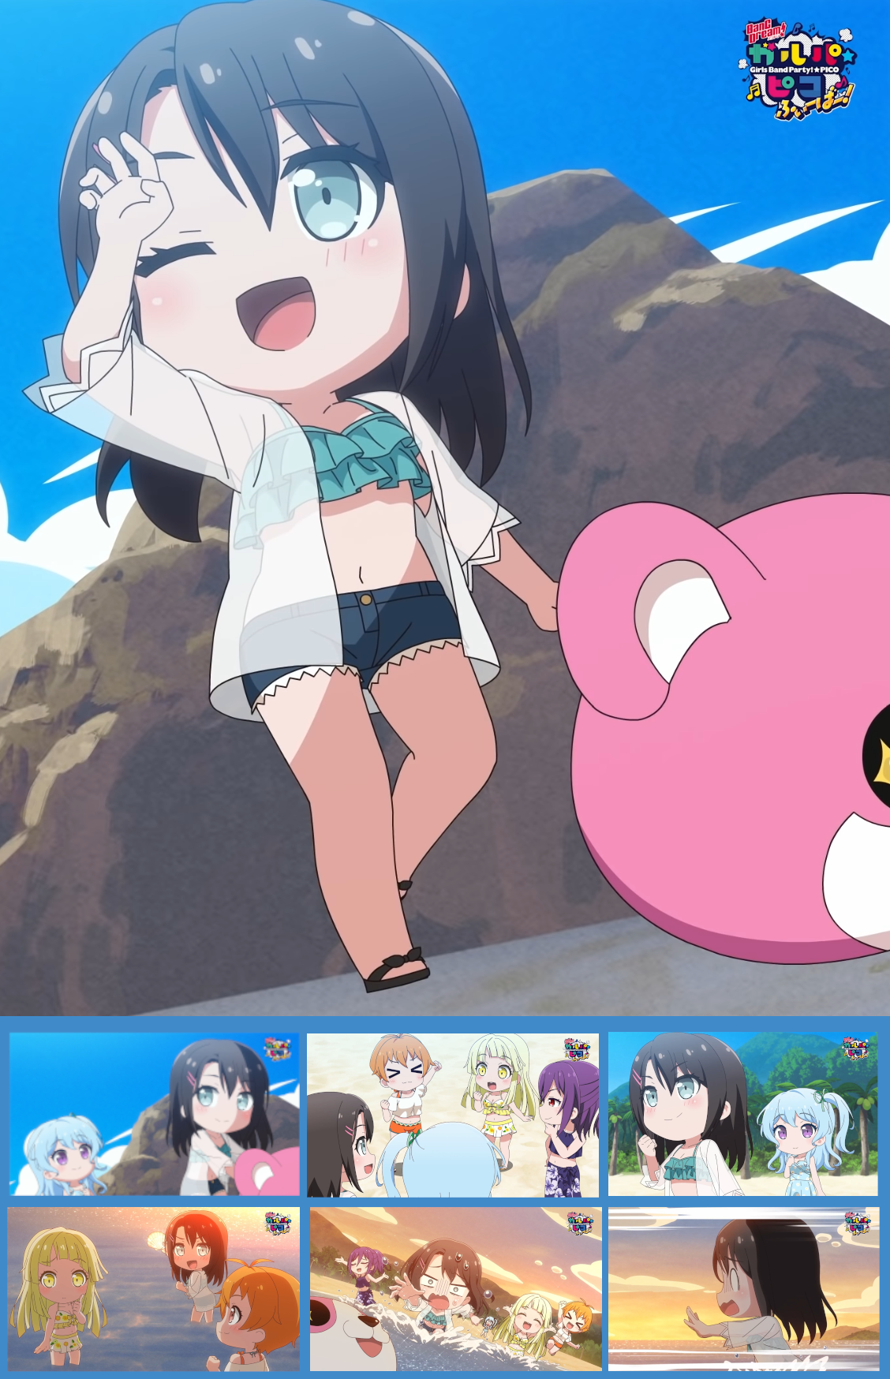     Misaki looks so cute
Finally, they gave HHW! a chapter in garupa pico